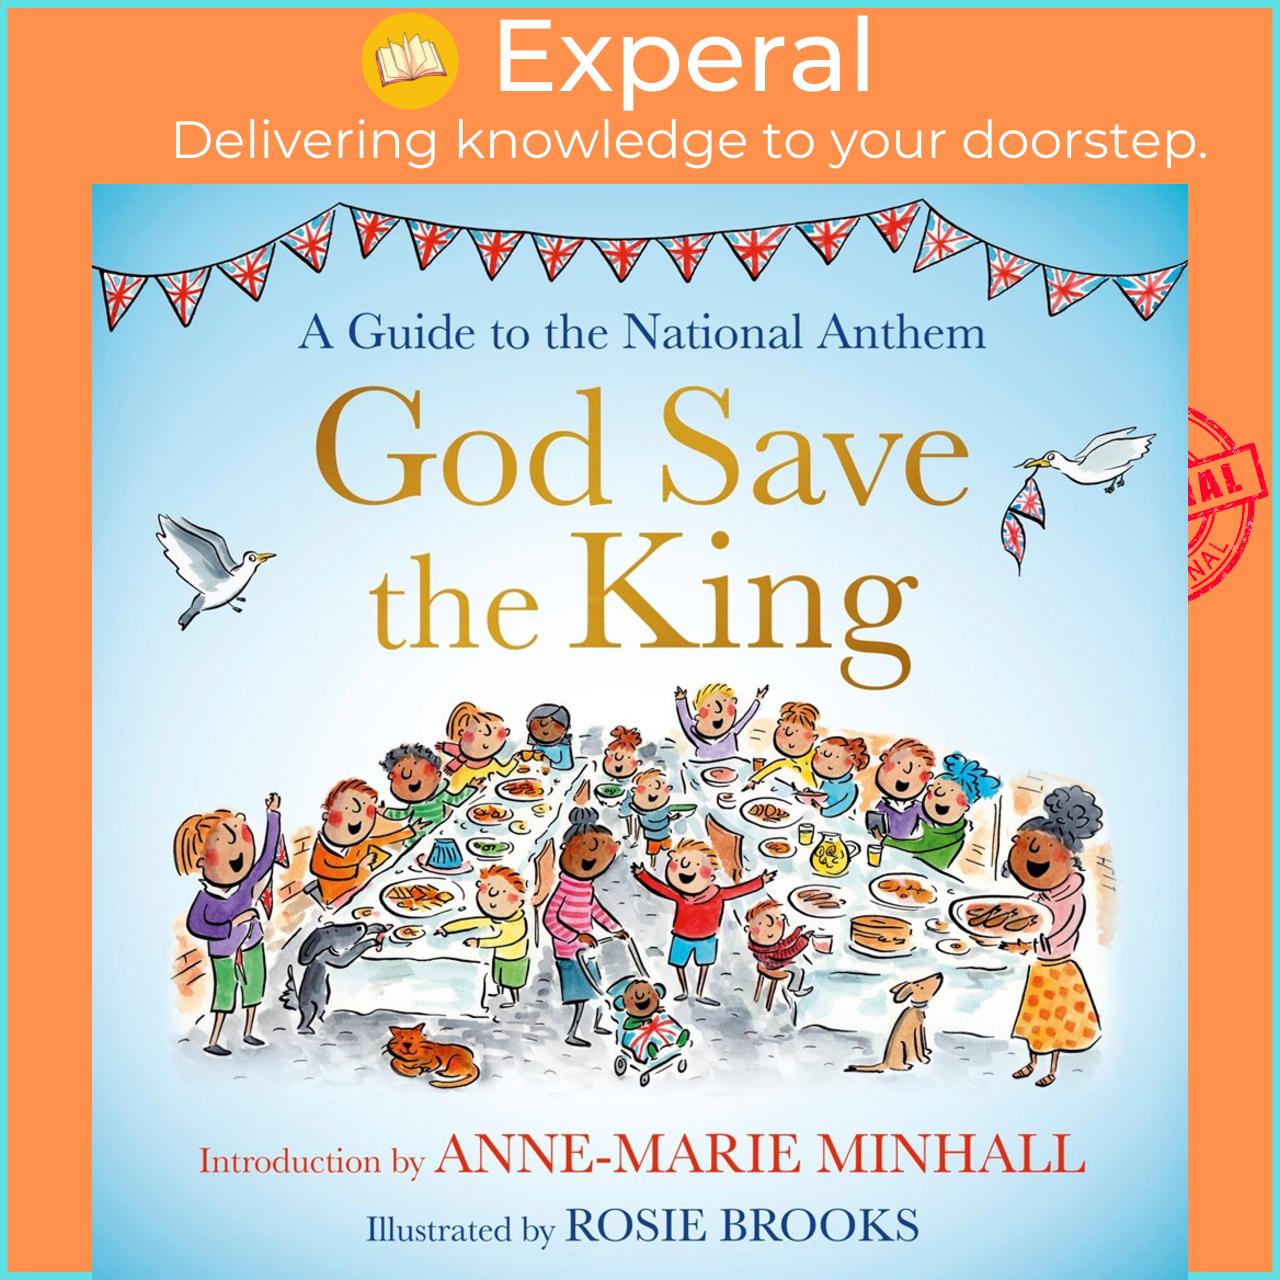 Sách - God Save the King : A Guide to the National Anthem by Anne-Marie Minhall,Rosie Brooks (UK edition, hardcover)